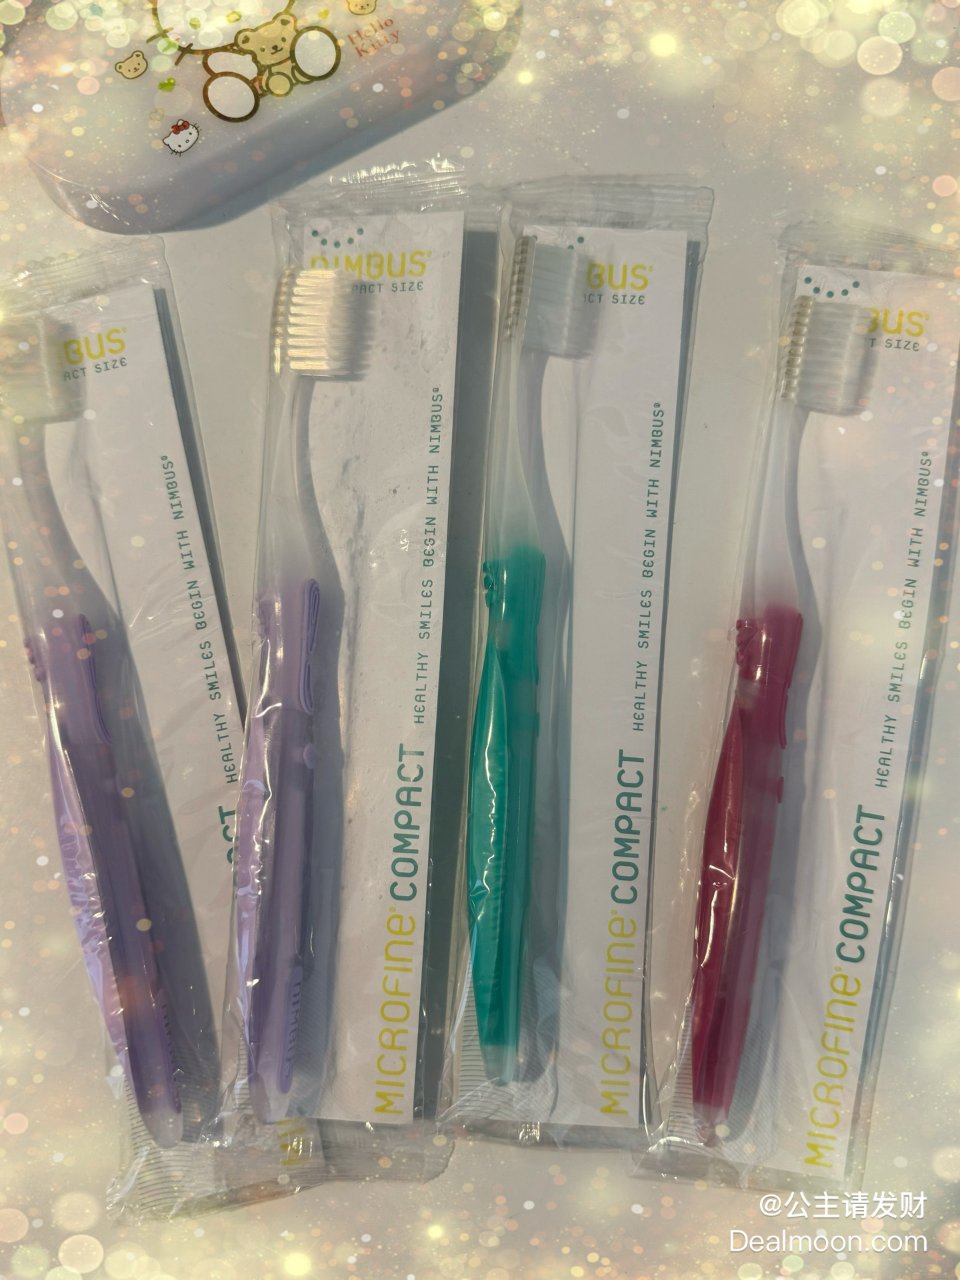 Amazon 亚马逊,Nimbus Extra Soft Toothbrushes (Regular Size Head), Periodontist Design Tapered Bristles for Sensitive Teeth & Receding Gums (5 Pack, Colors May Vary) : Nimbus Toothbrush : Health & Household